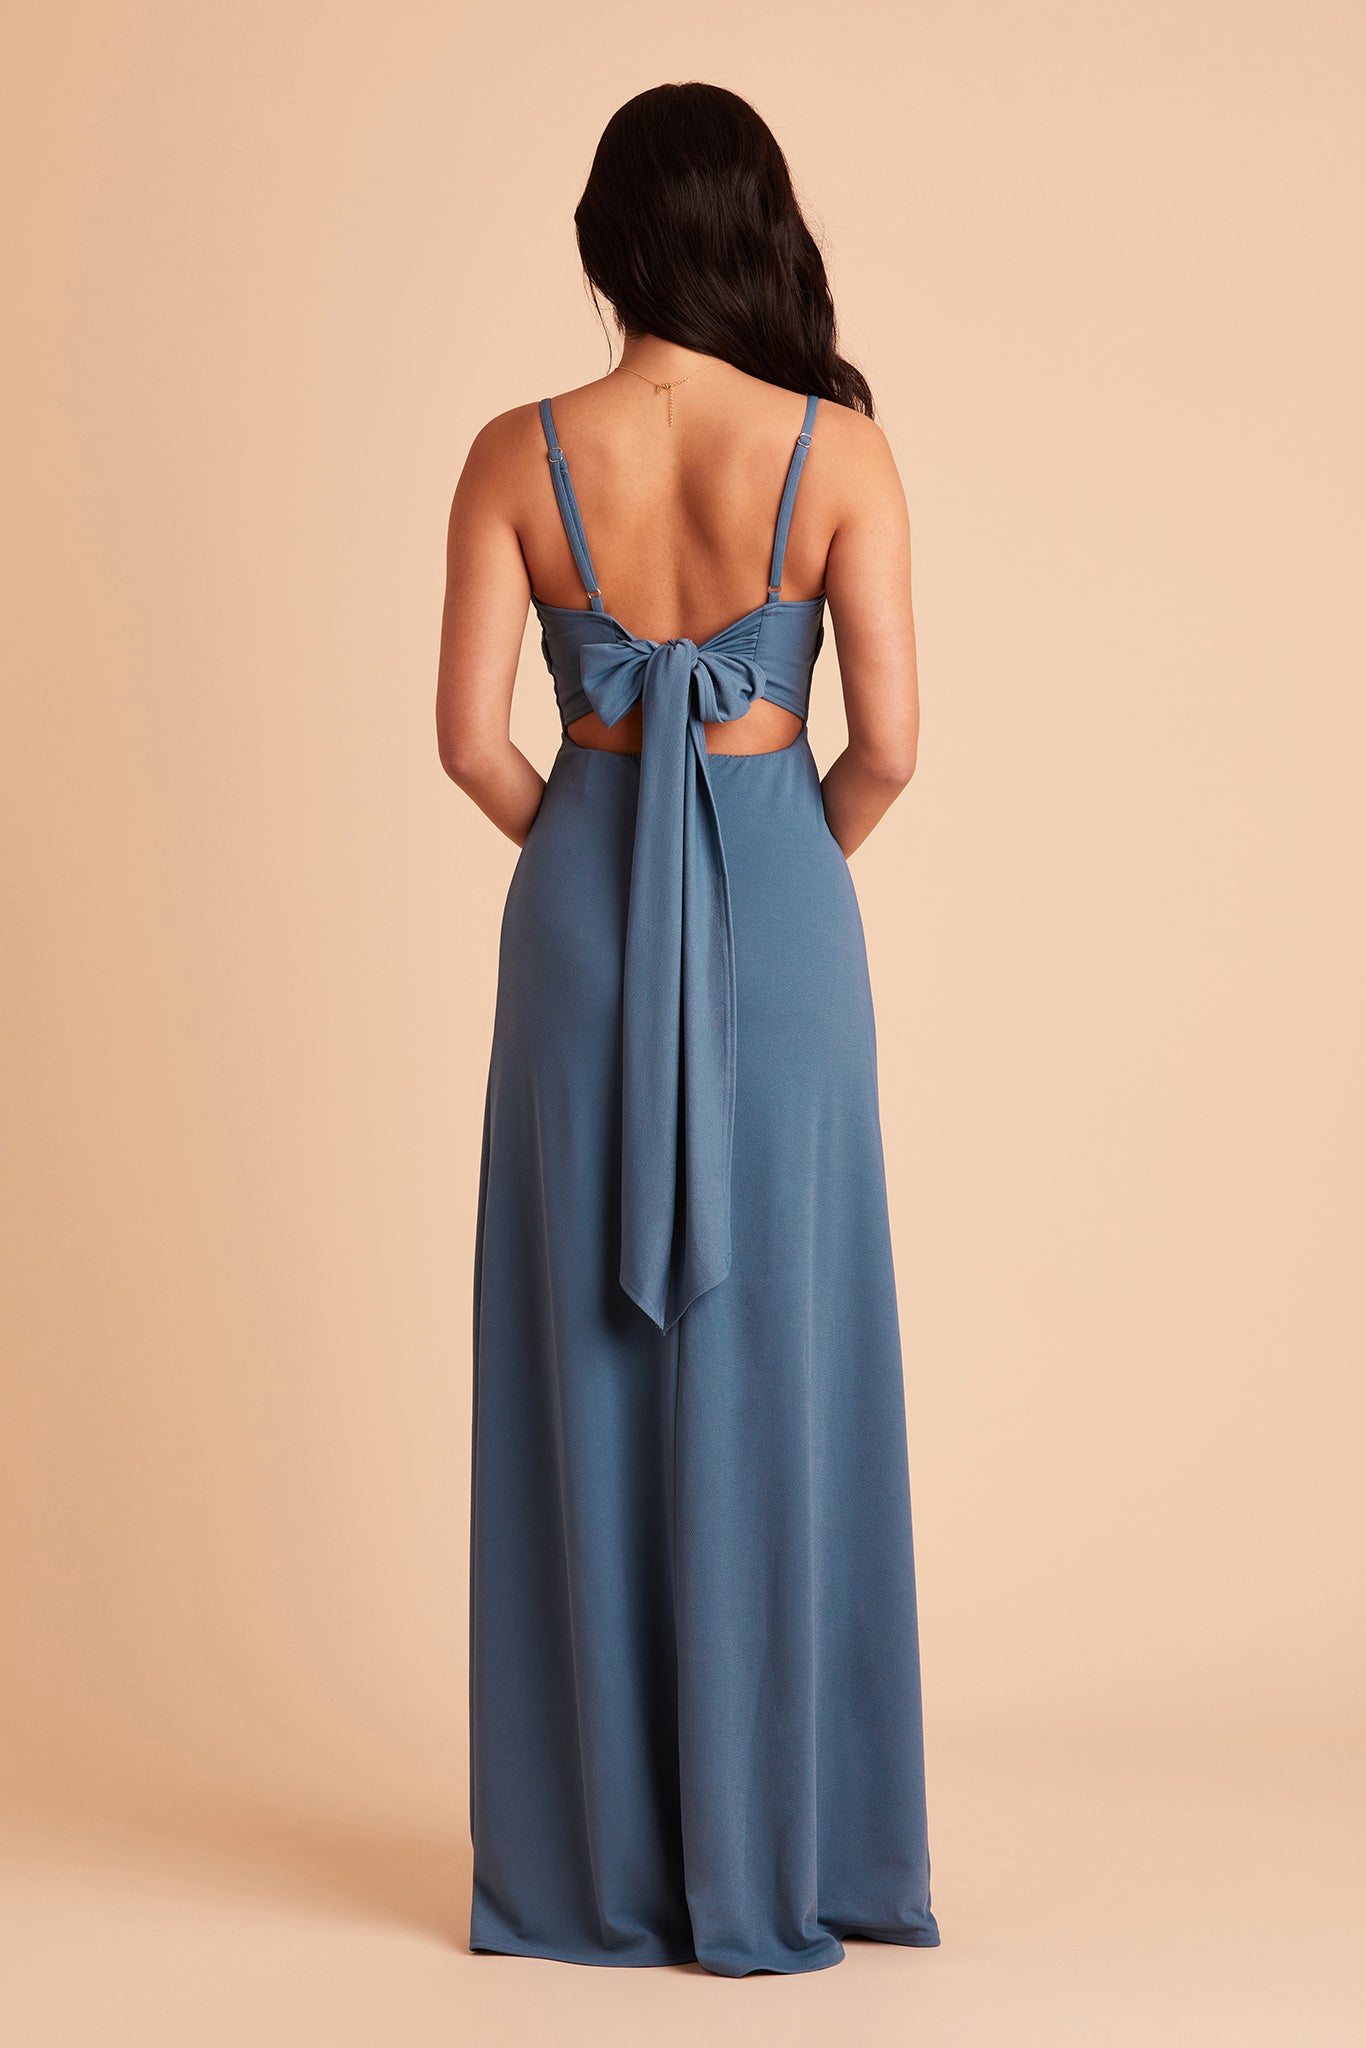 Benny bridesmaid dress in twilight crepe by Birdy Grey, back view